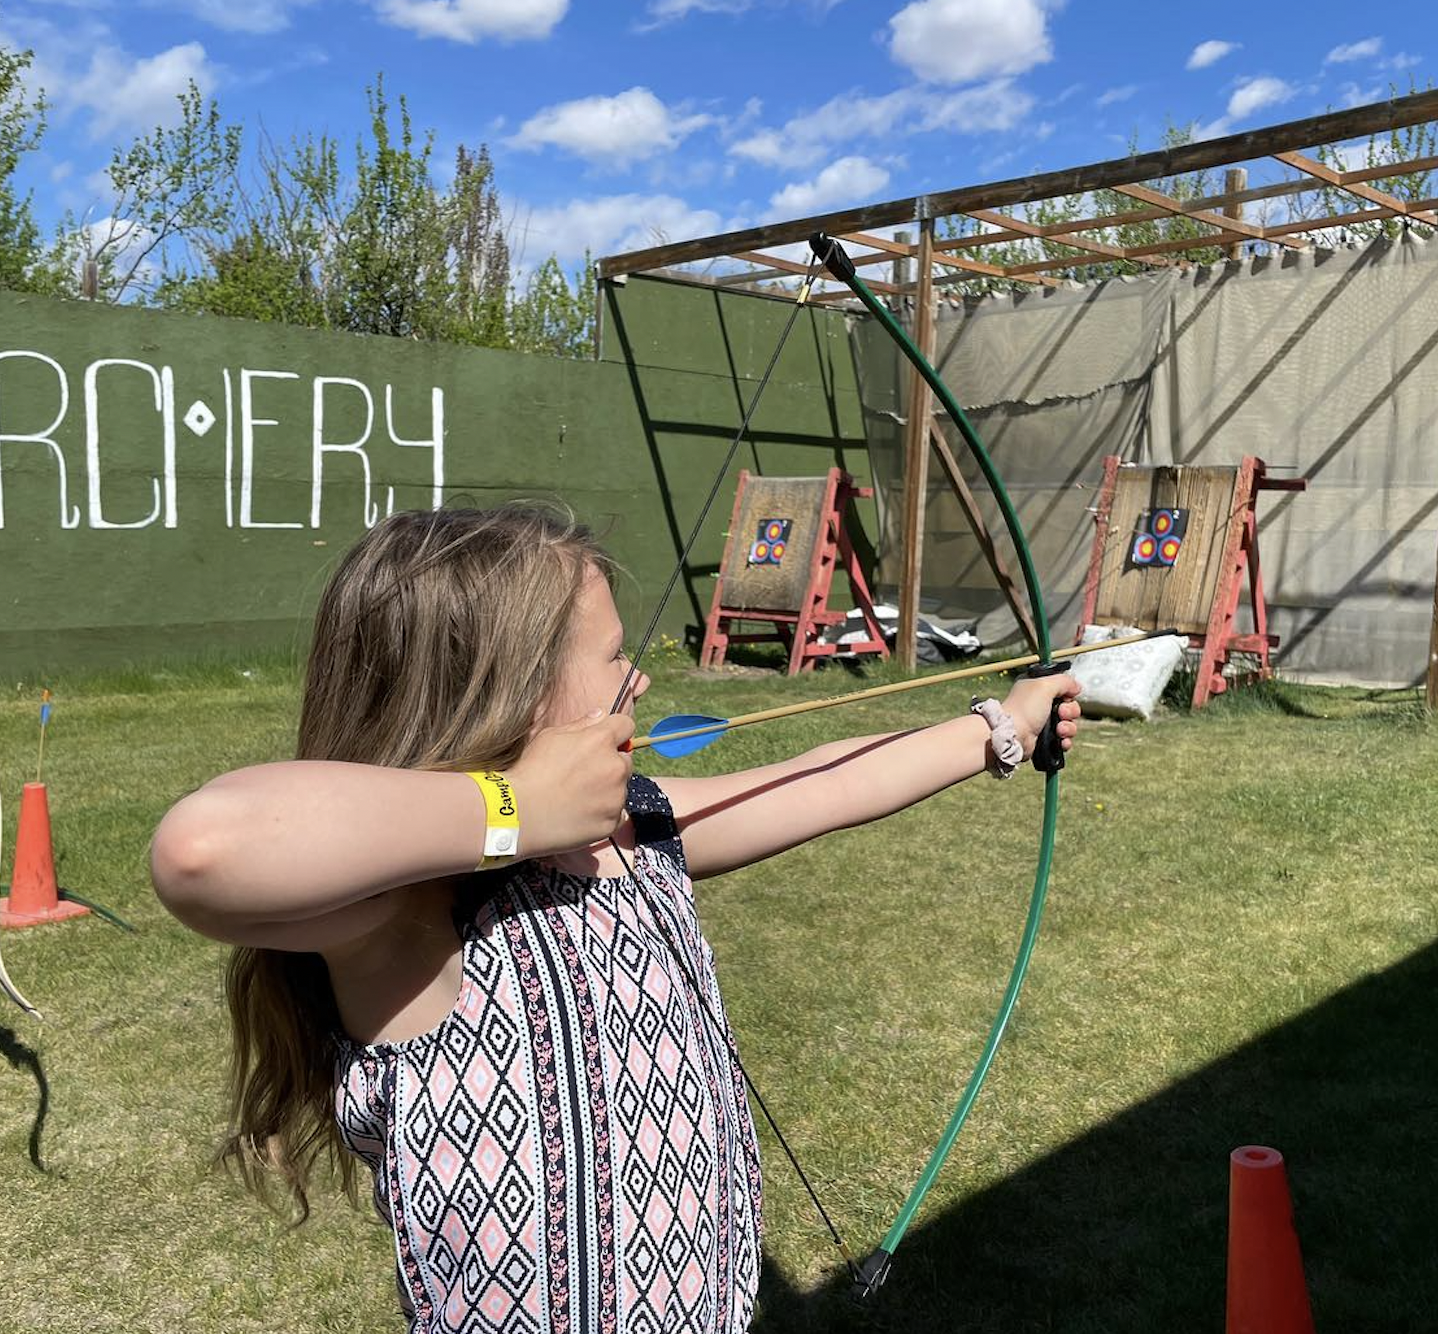 Camp Chestermere celebrates reopening with Family Fun Fair